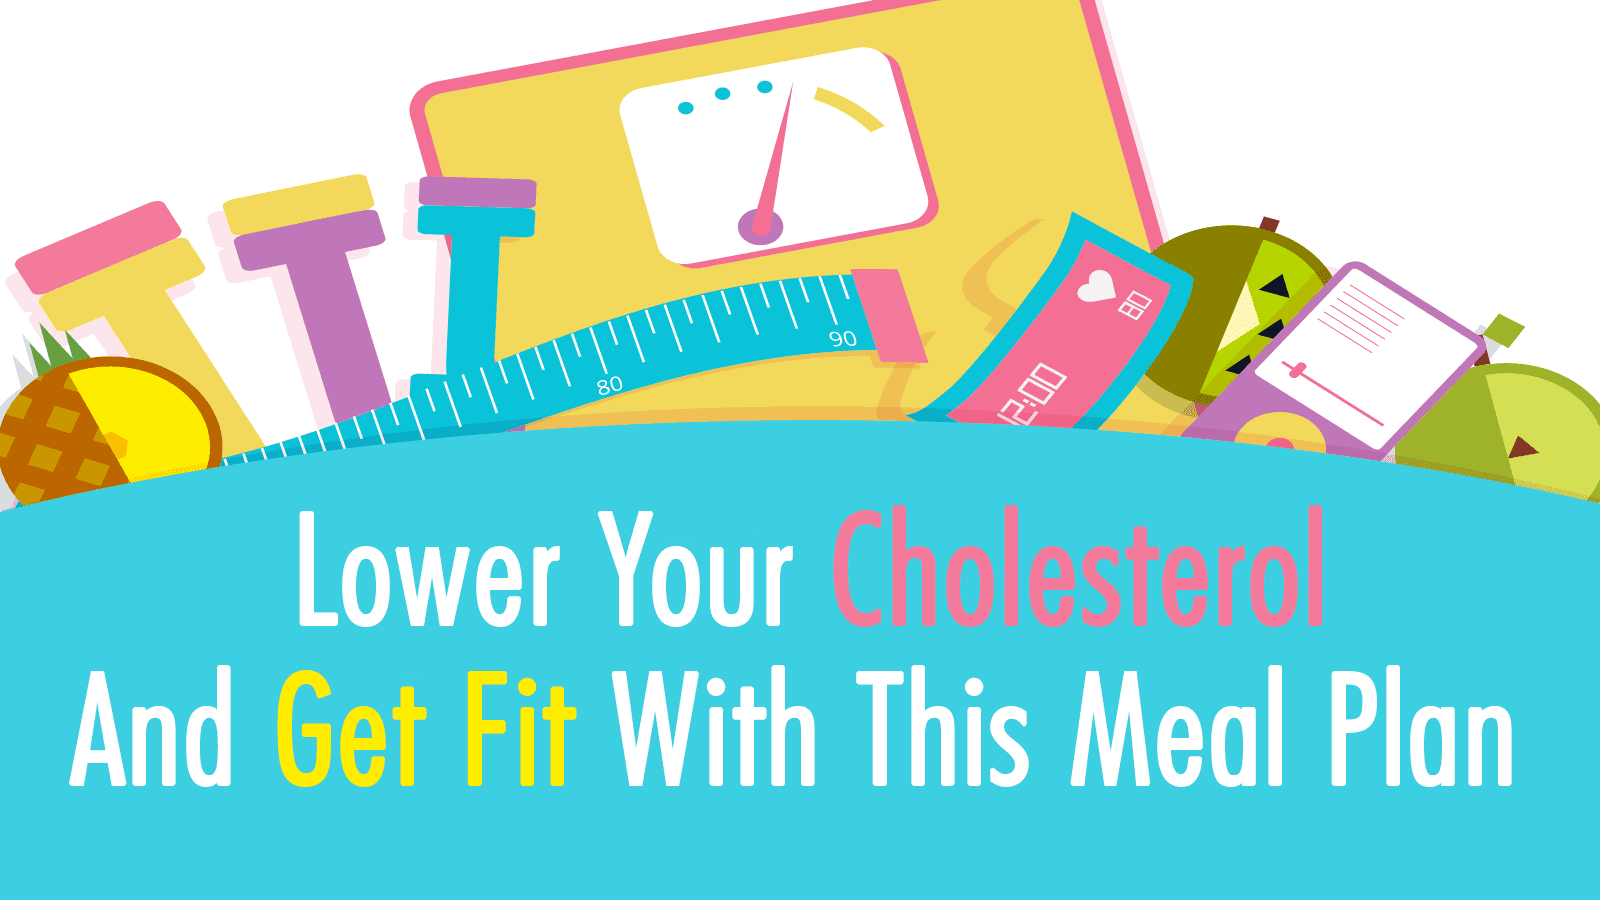 Lower Your Cholesterol And Get Fit With This Meal Plan